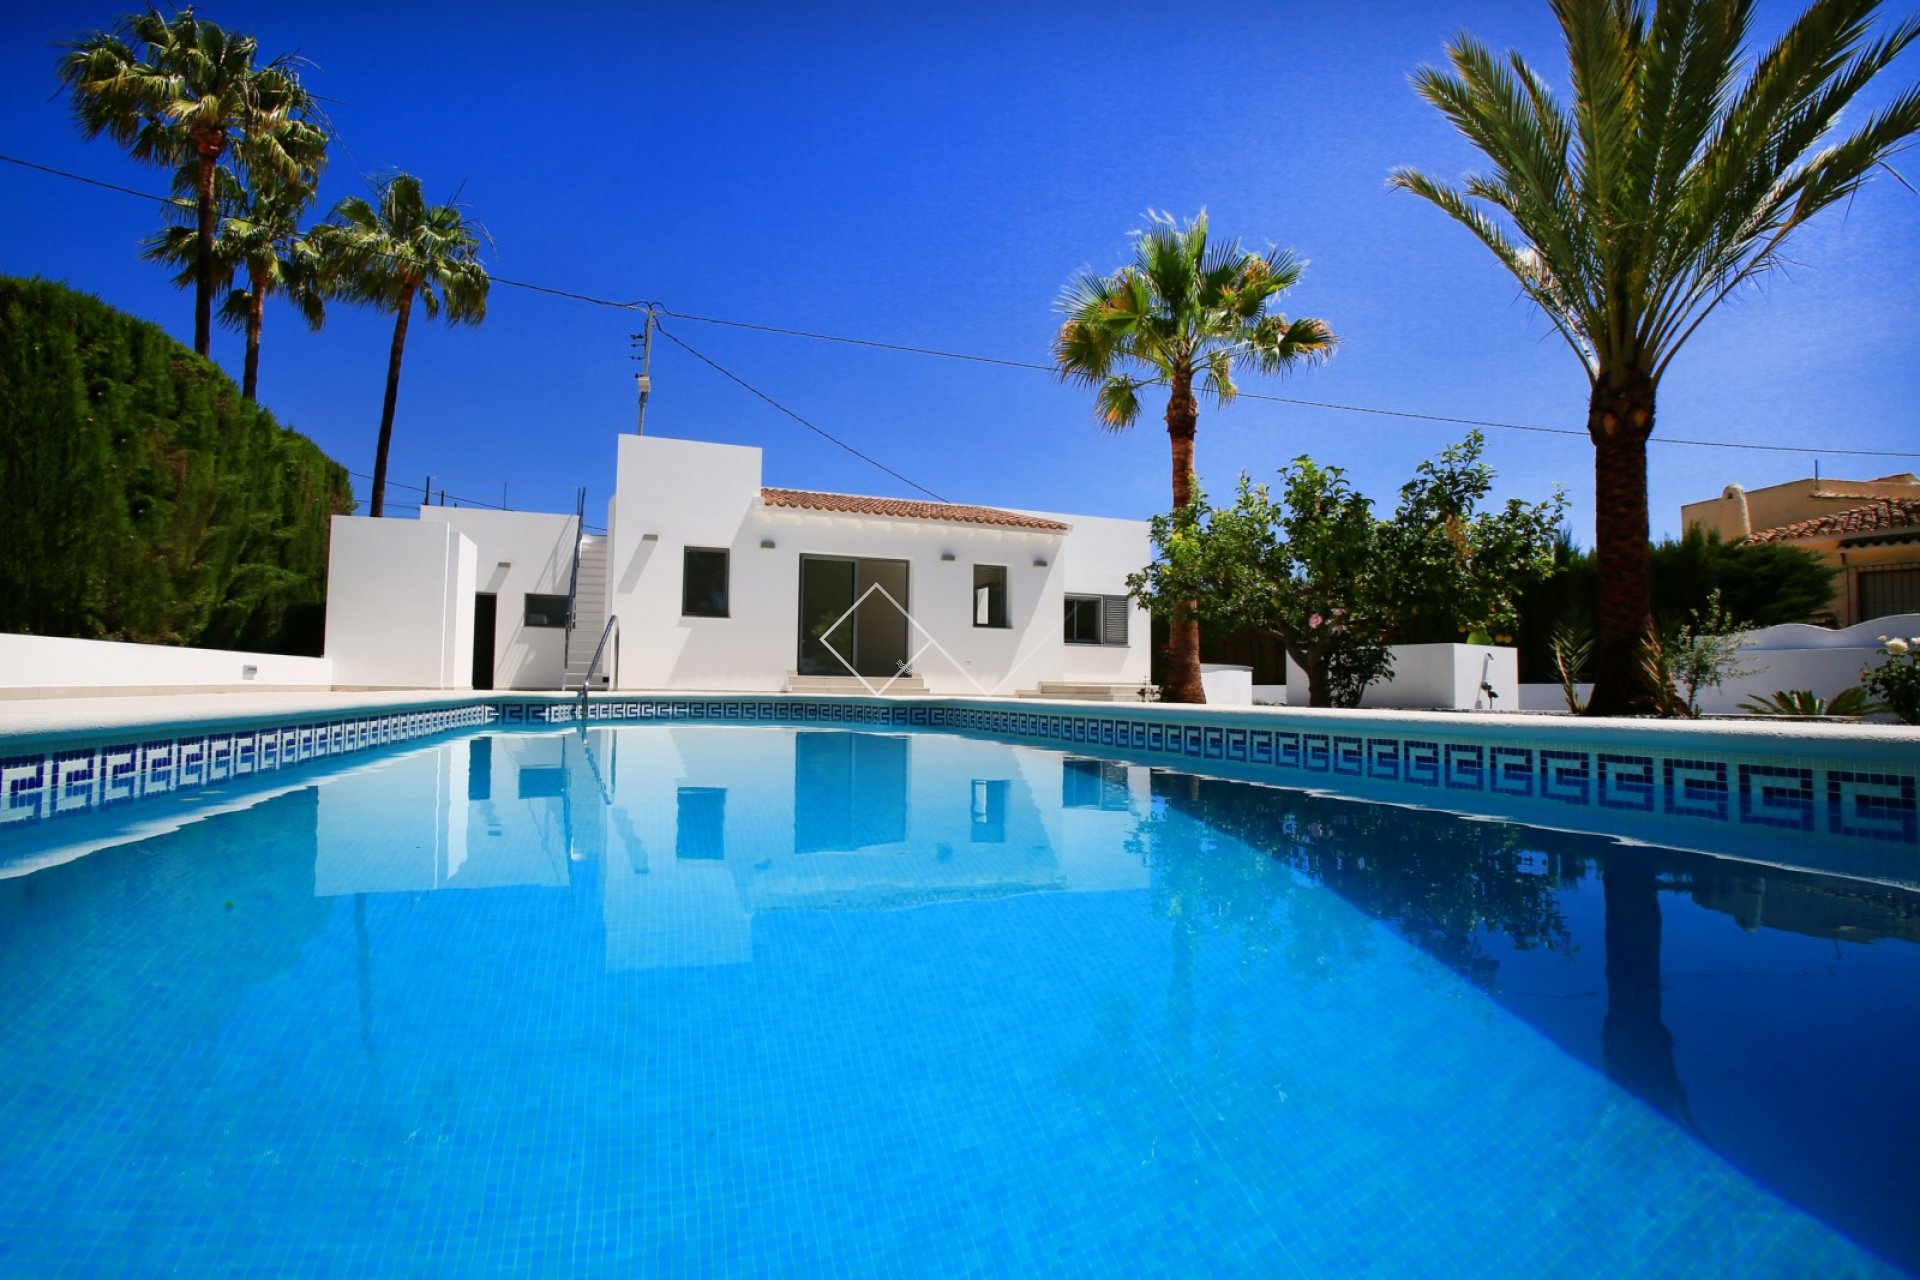 pool palmtrees - Renovated villa for sale in Benissa, 200m from the beach